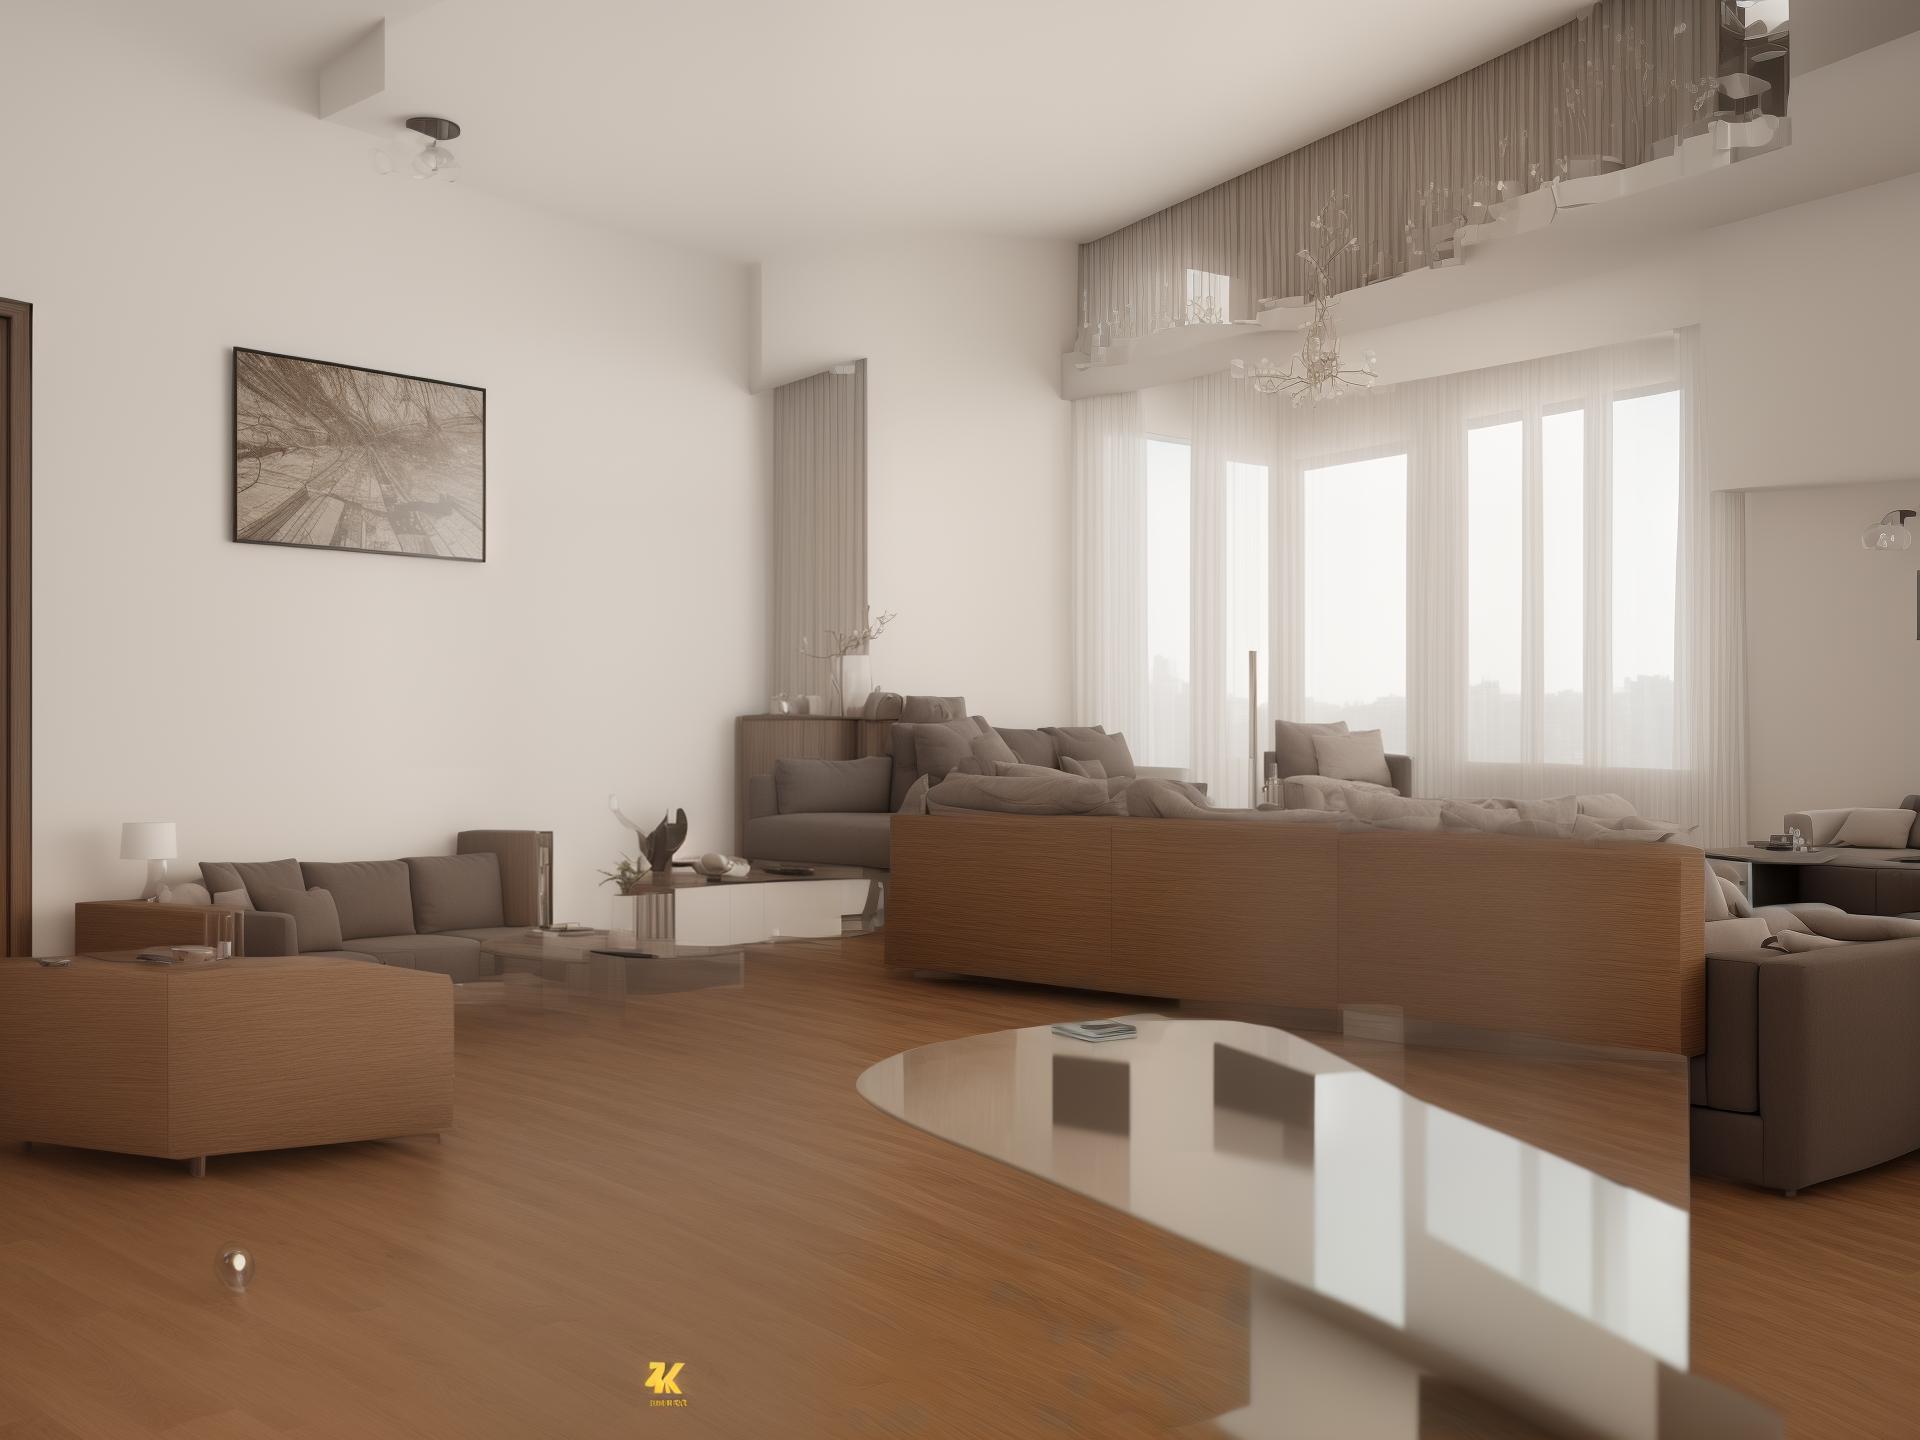  (masterpiece),(high quality), best quality, real,(realistic), super detailed, (full detail),(4k),8k,interior,Living Room, Modern,